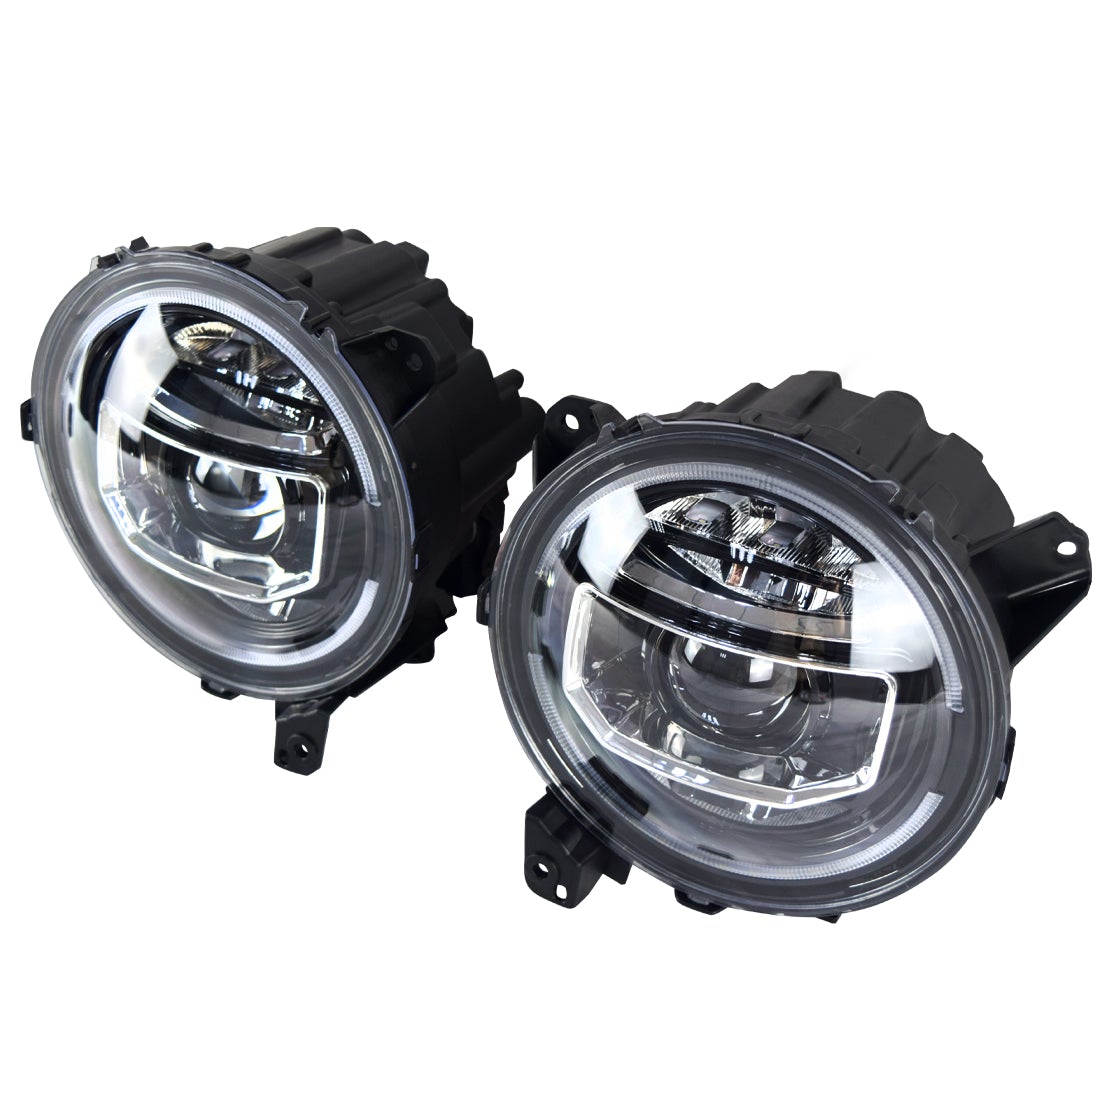 9 INCH LED HALO HEADLIGHTS & DEMON GRILLE W/ MESH COMBO FOR 18-23 JEEP WRANGLER JL & GLADIATOR JT